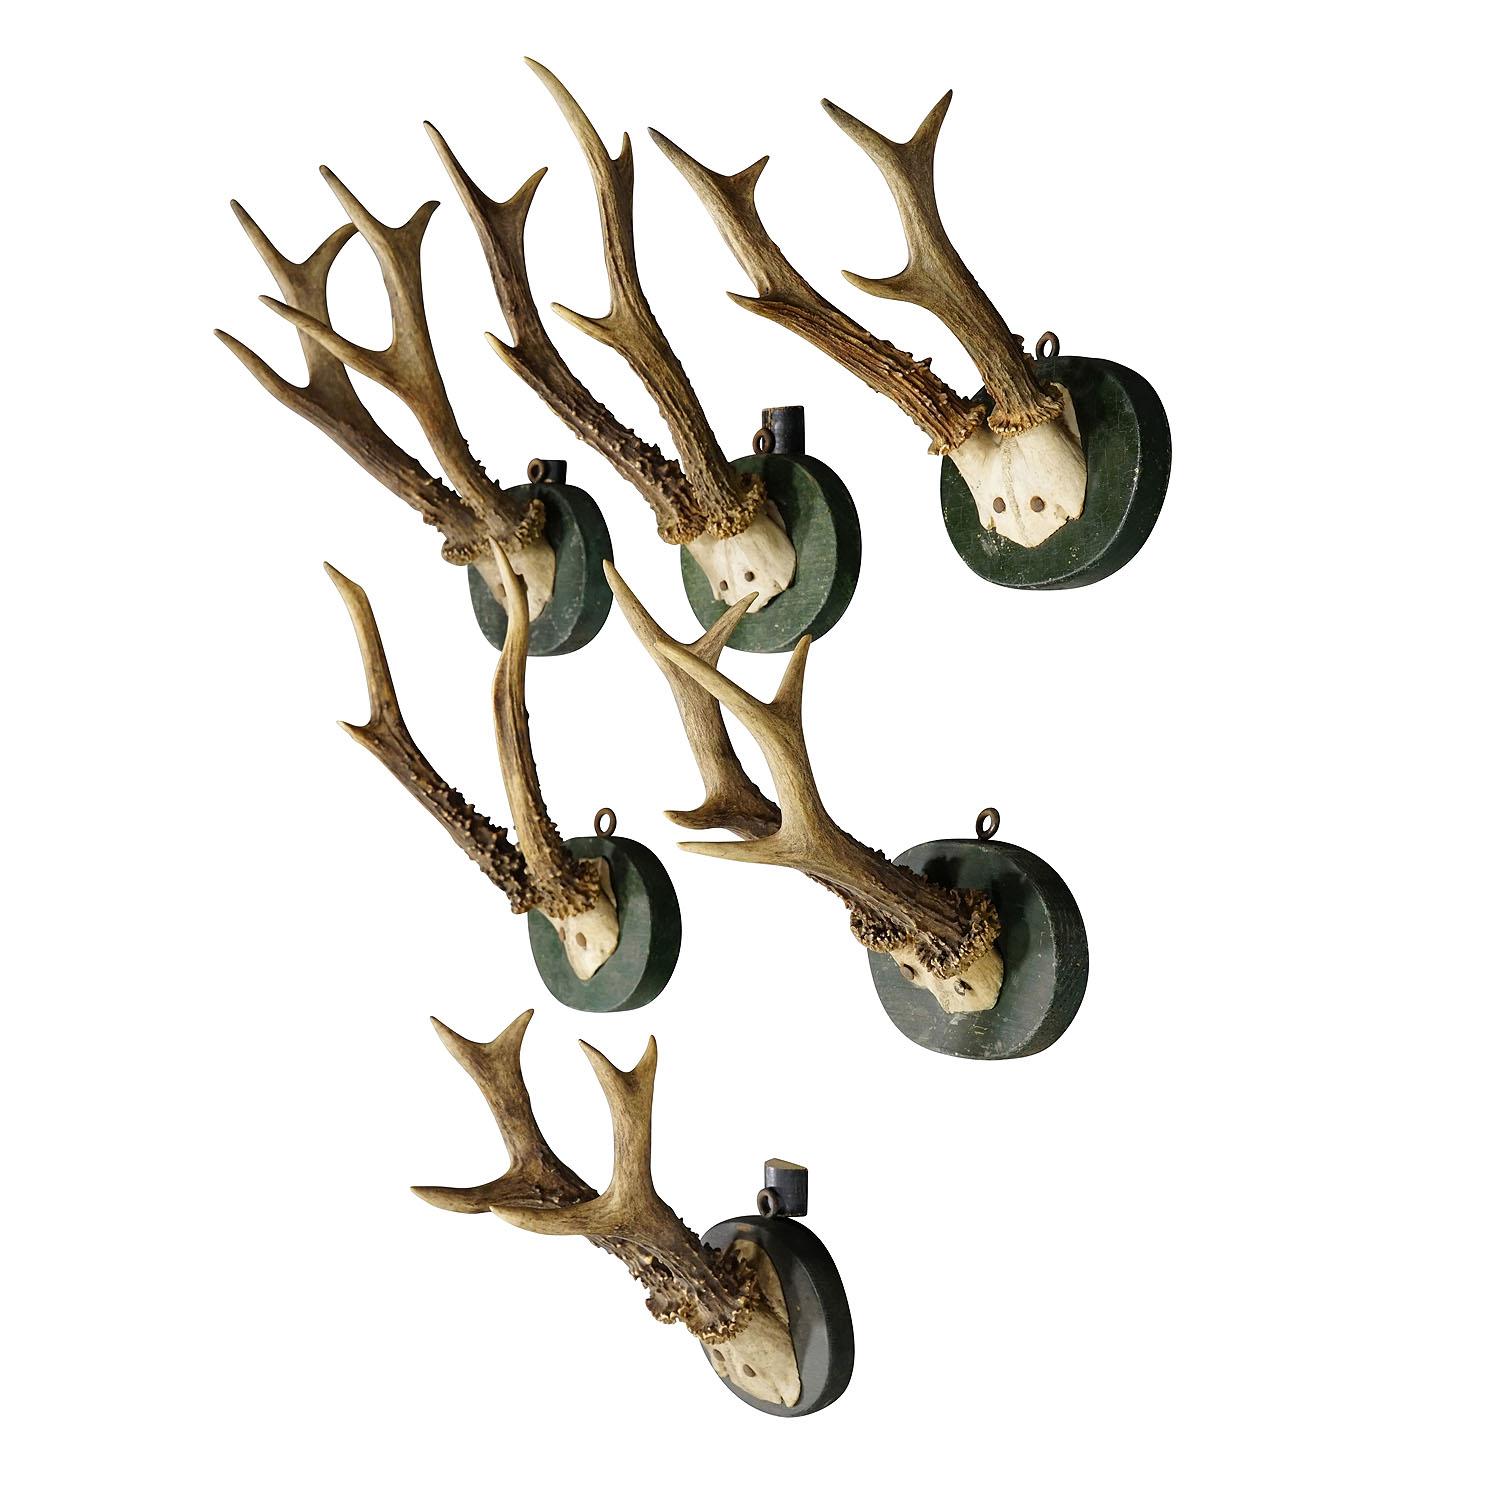 1880s Black Forest Deer Trophy Set on Turned Wooden Plaques

A set of six antique Black Forest roe deer (Capreolus capreolus) trophies mounted on turned wooden plaques with a dark green finish. The trophies were shot in Germany in the 1880s. Two